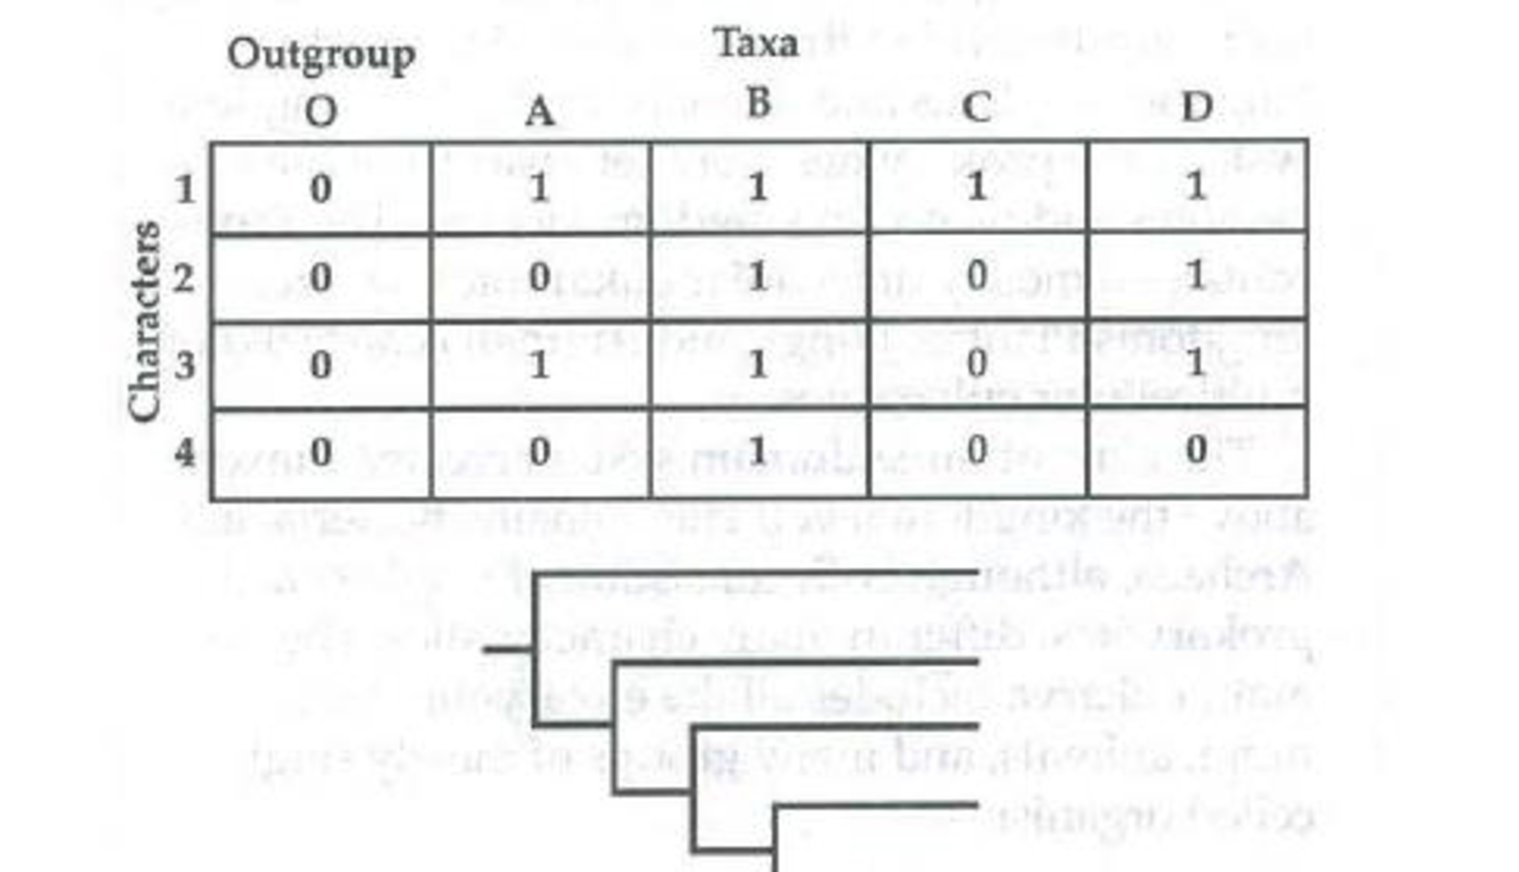 Chapter 26, Problem 3IQ, Place the taxa (outgroup. A, B, C, and D) on the following phylogenetic tree based on the presence 